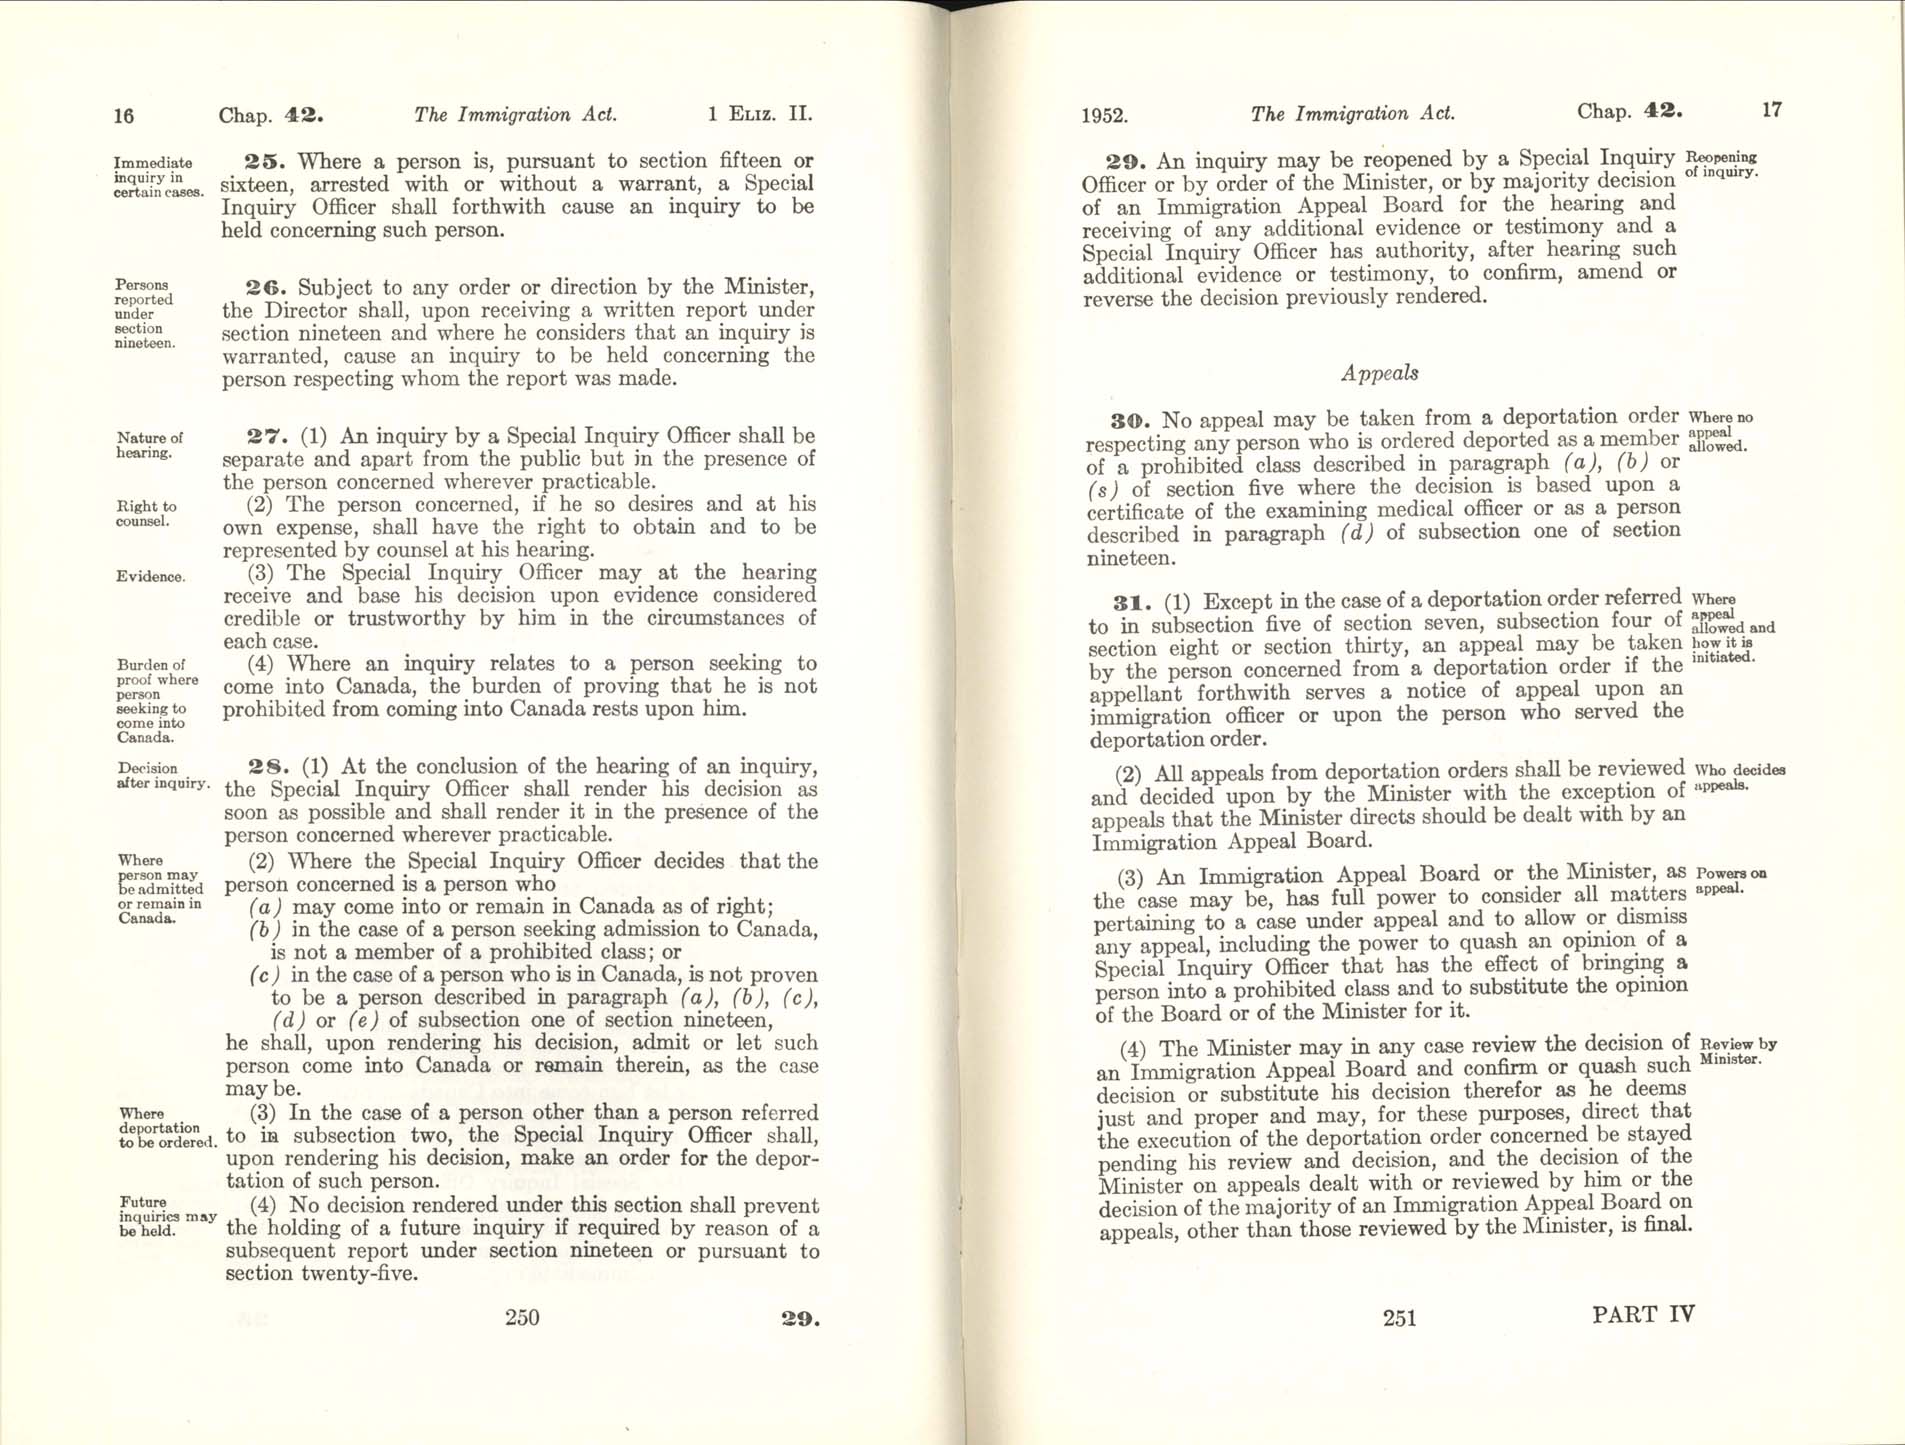 CHAP 42 Page 250, 251 Immigration Act, 1952